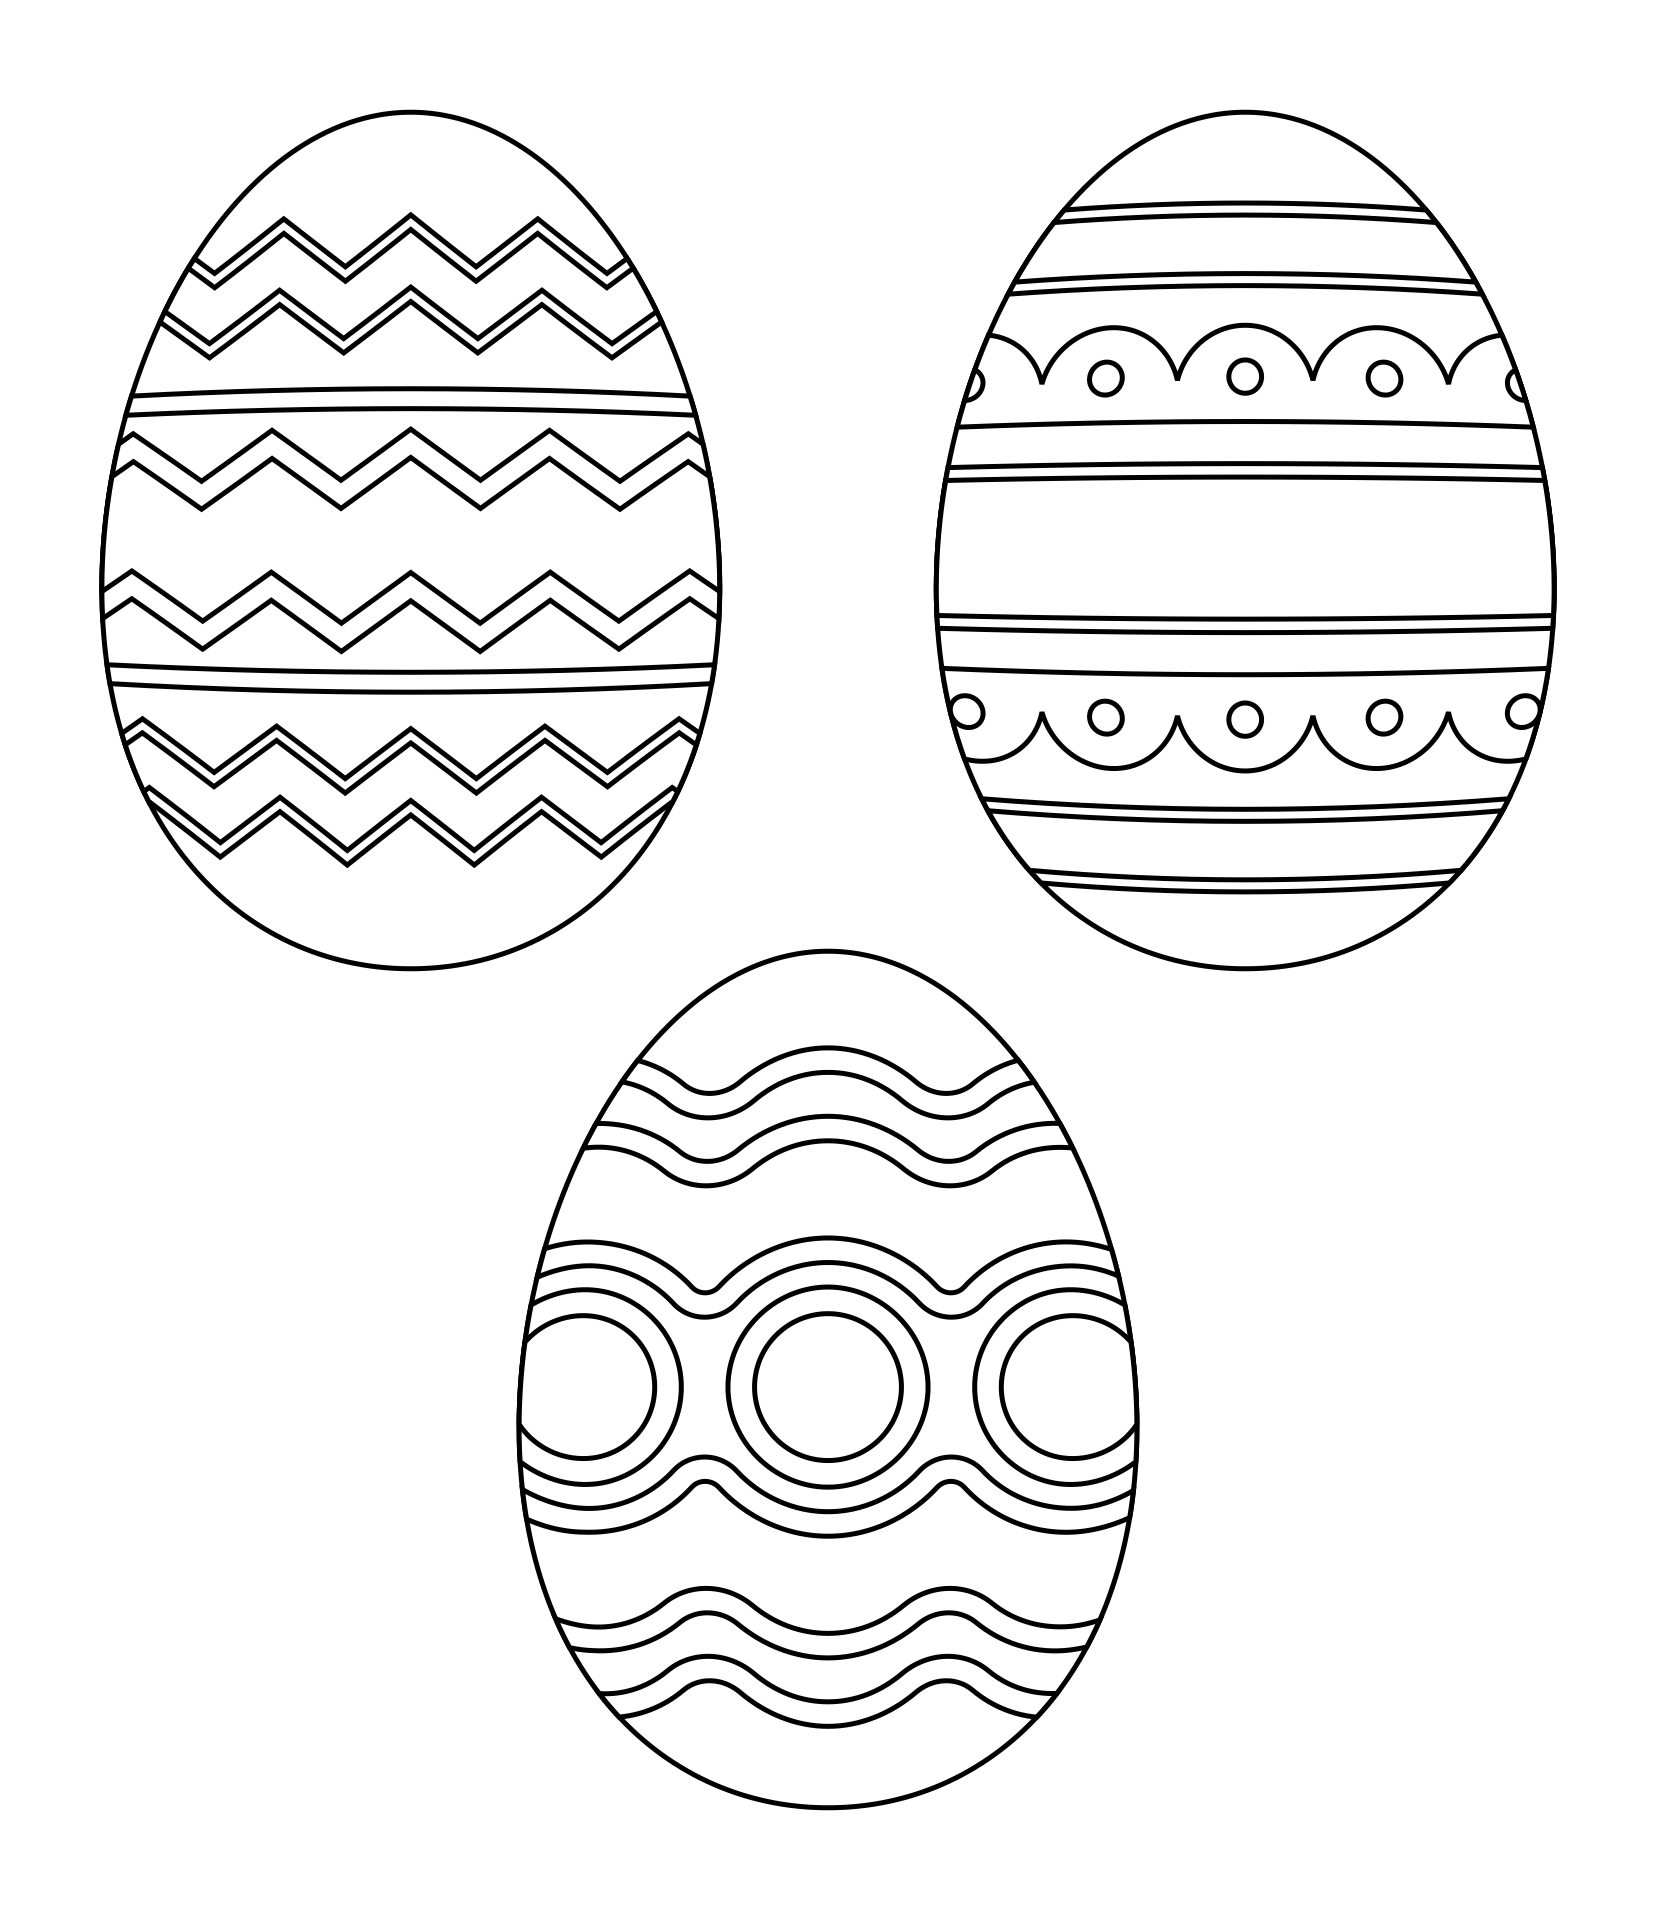 6-best-images-of-free-printable-christian-easter-crafts-christian-easter-craft-cross-of-jesus